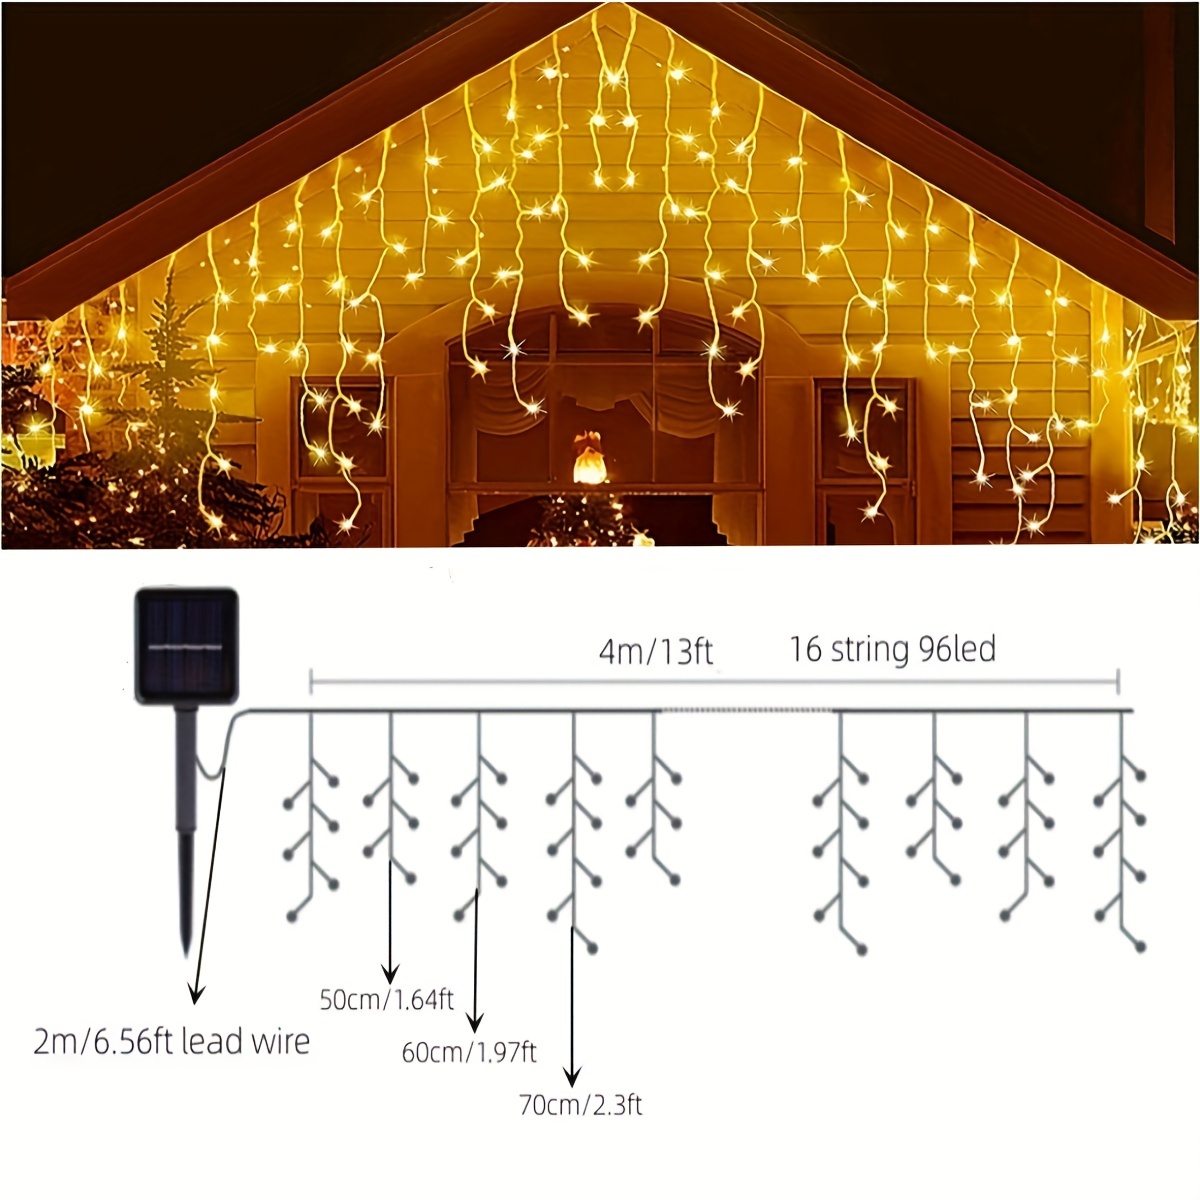 1pc solar led icicle string lights yard light christmas icicle lights window curtain fairy lights for wedding party bedroom garden patio outdoor indoor 4m 13ft 96led halloween christmas decorations details 8